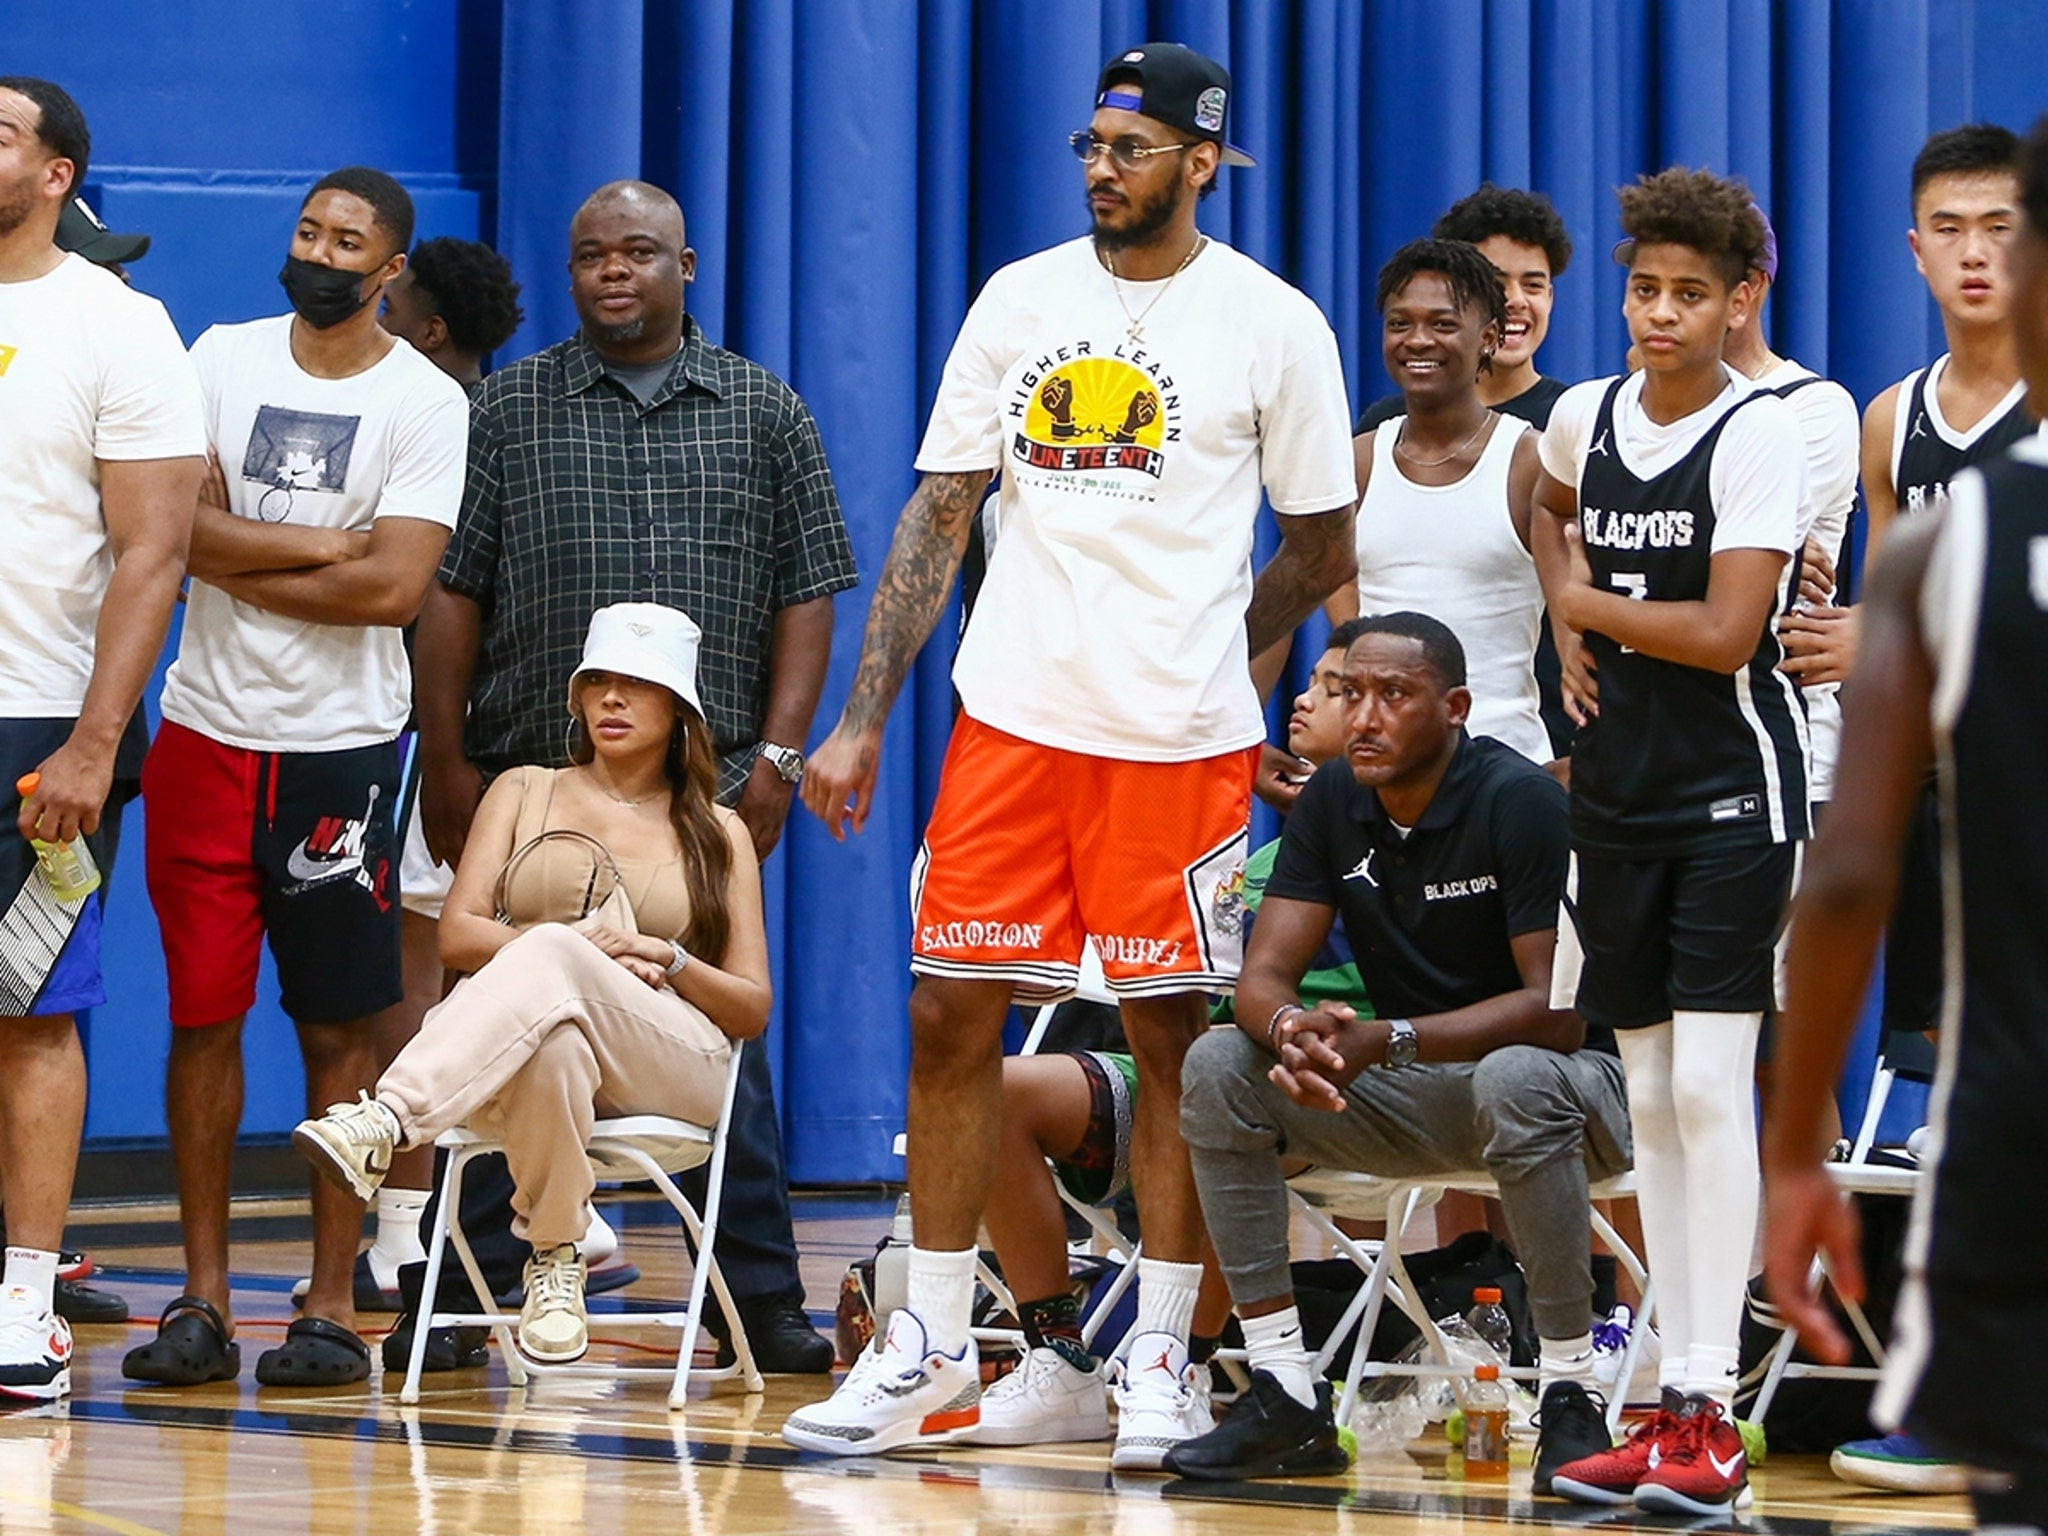 All About Carmelo Anthony's Son Kiyan